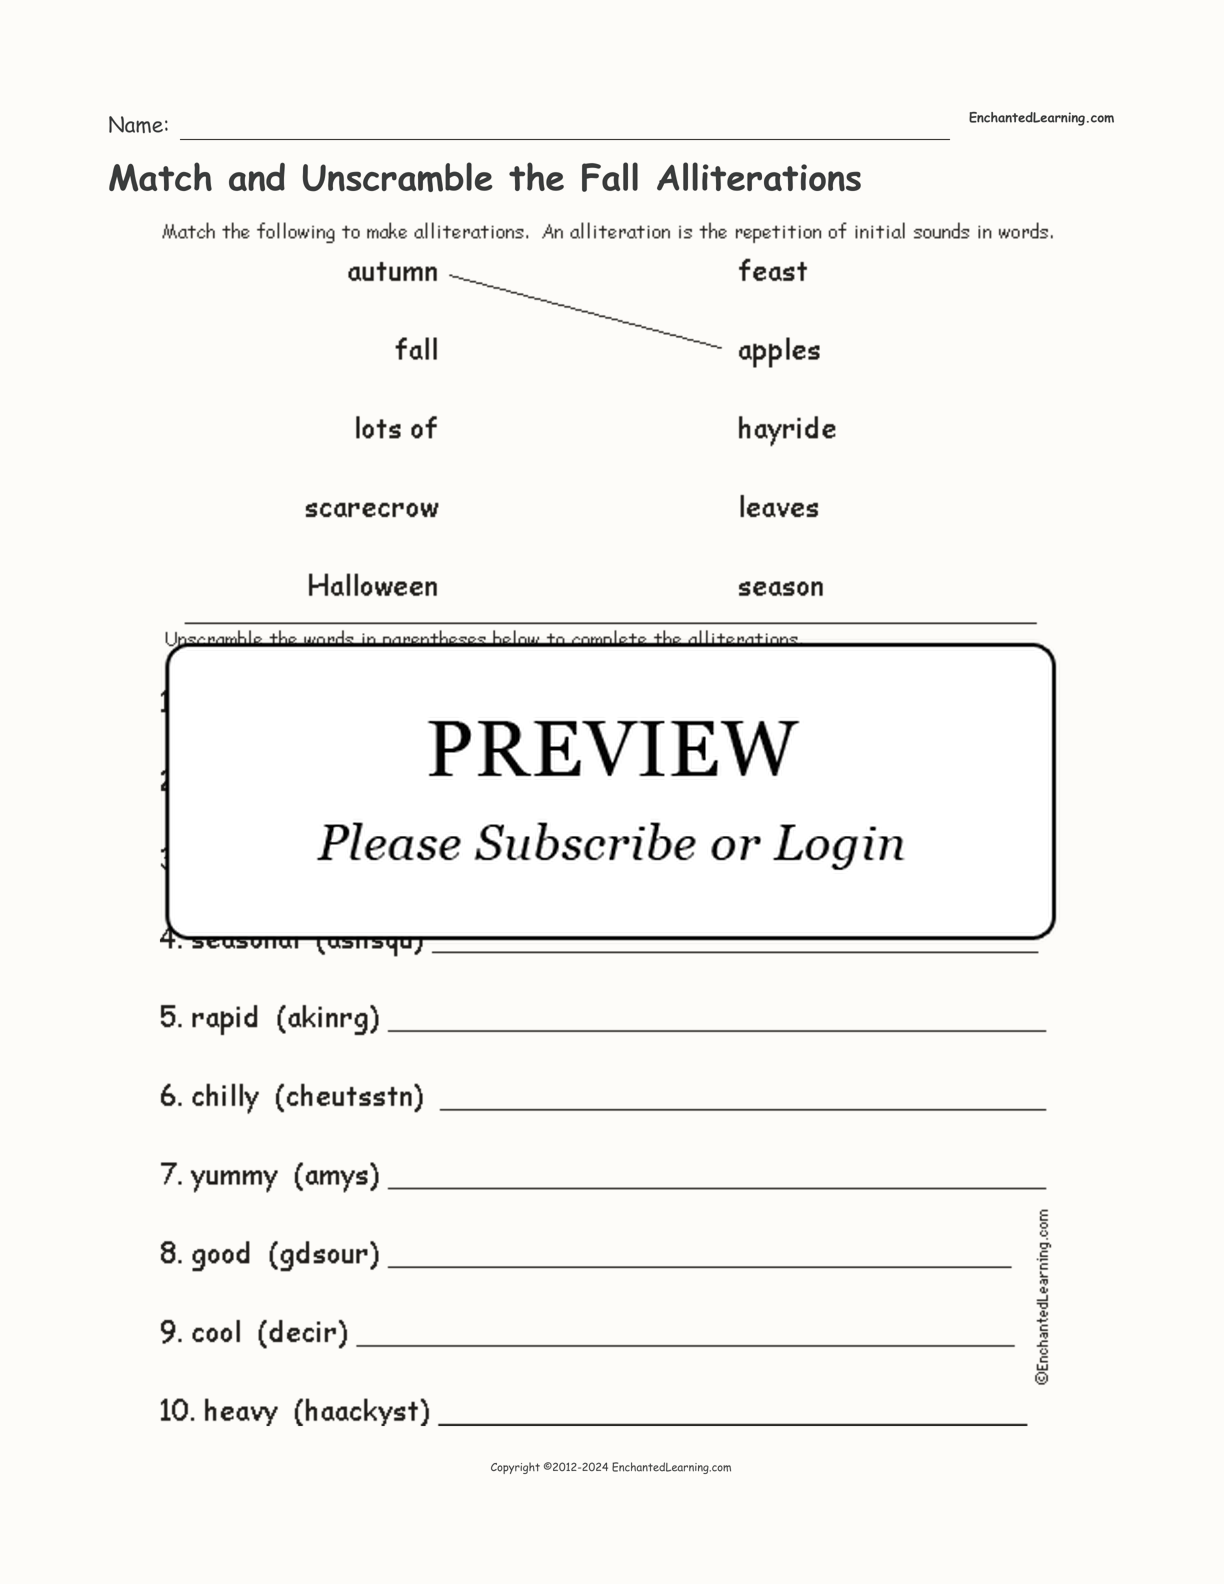 Match and Unscramble the Fall Alliterations interactive worksheet page 1